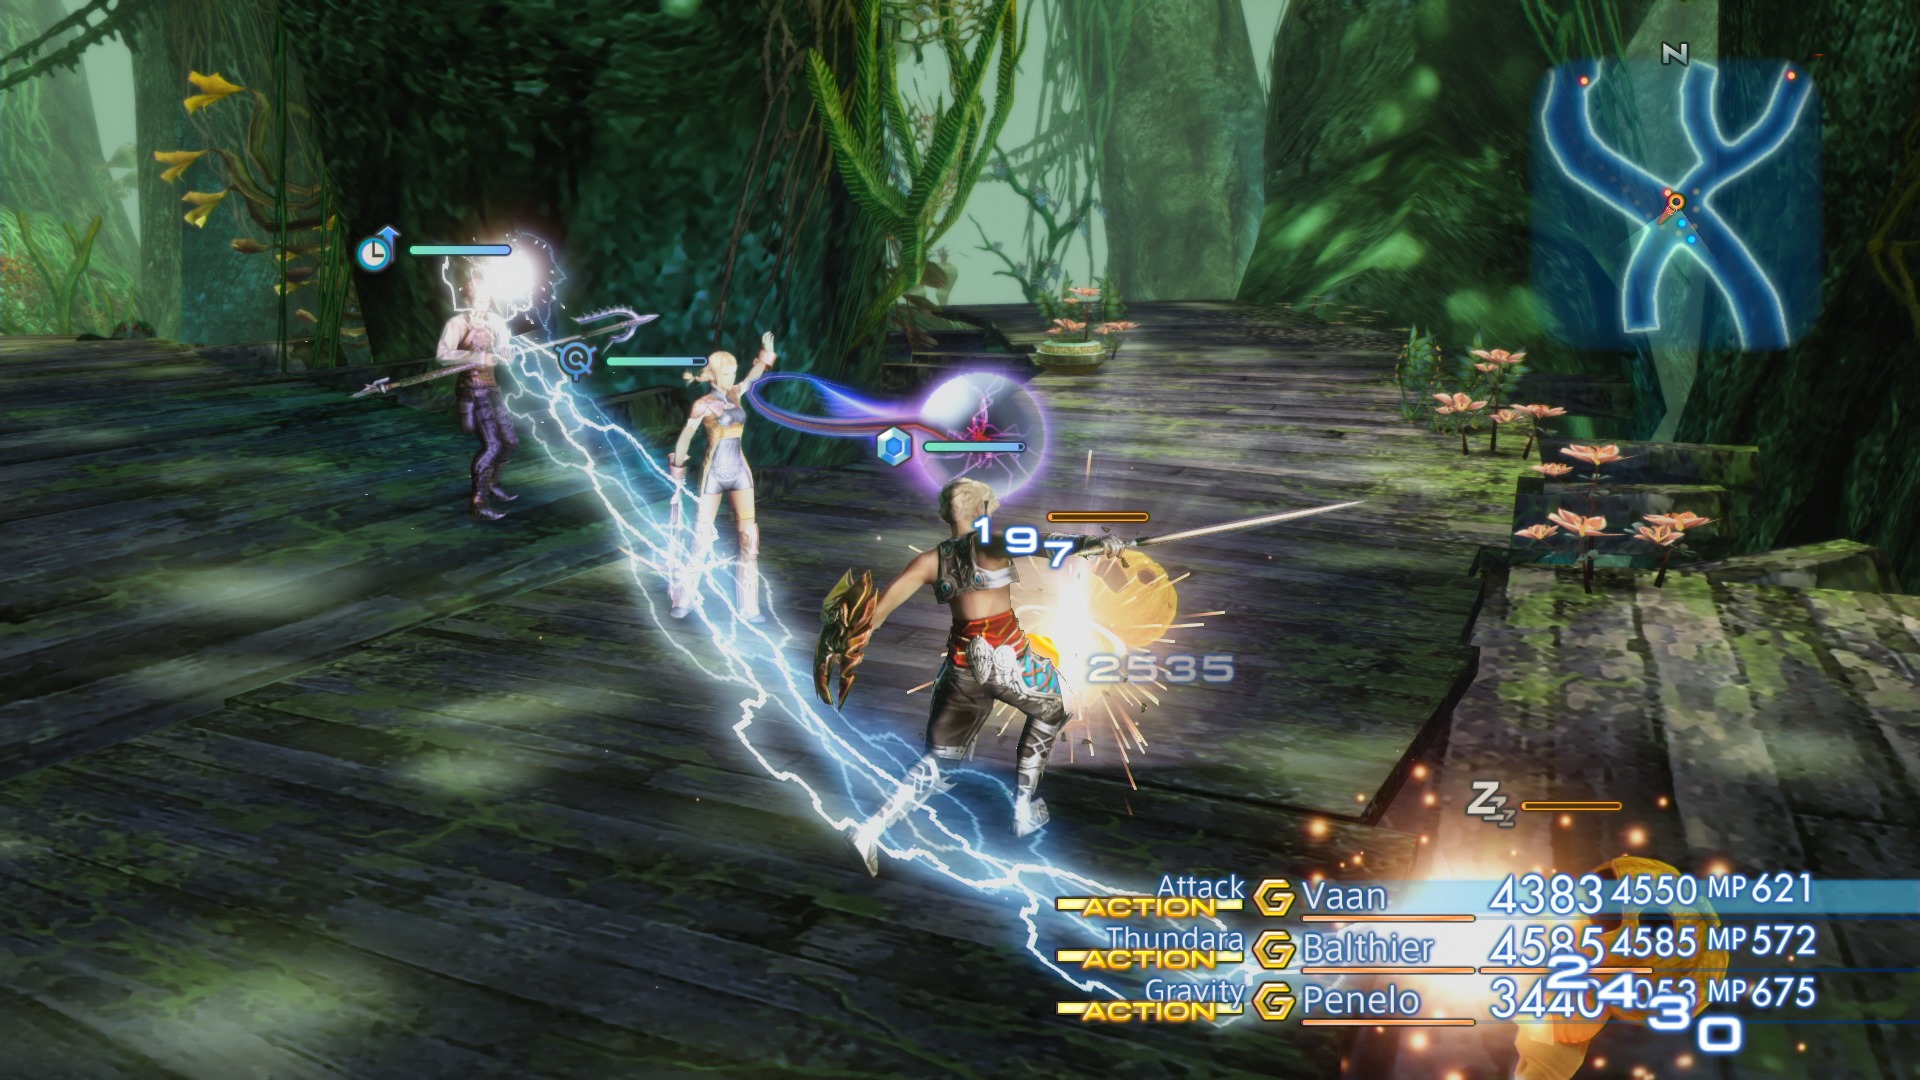 Final Fantasy Xii The Zodiac Age S Job System Makes A Great Battle System Better Siliconera